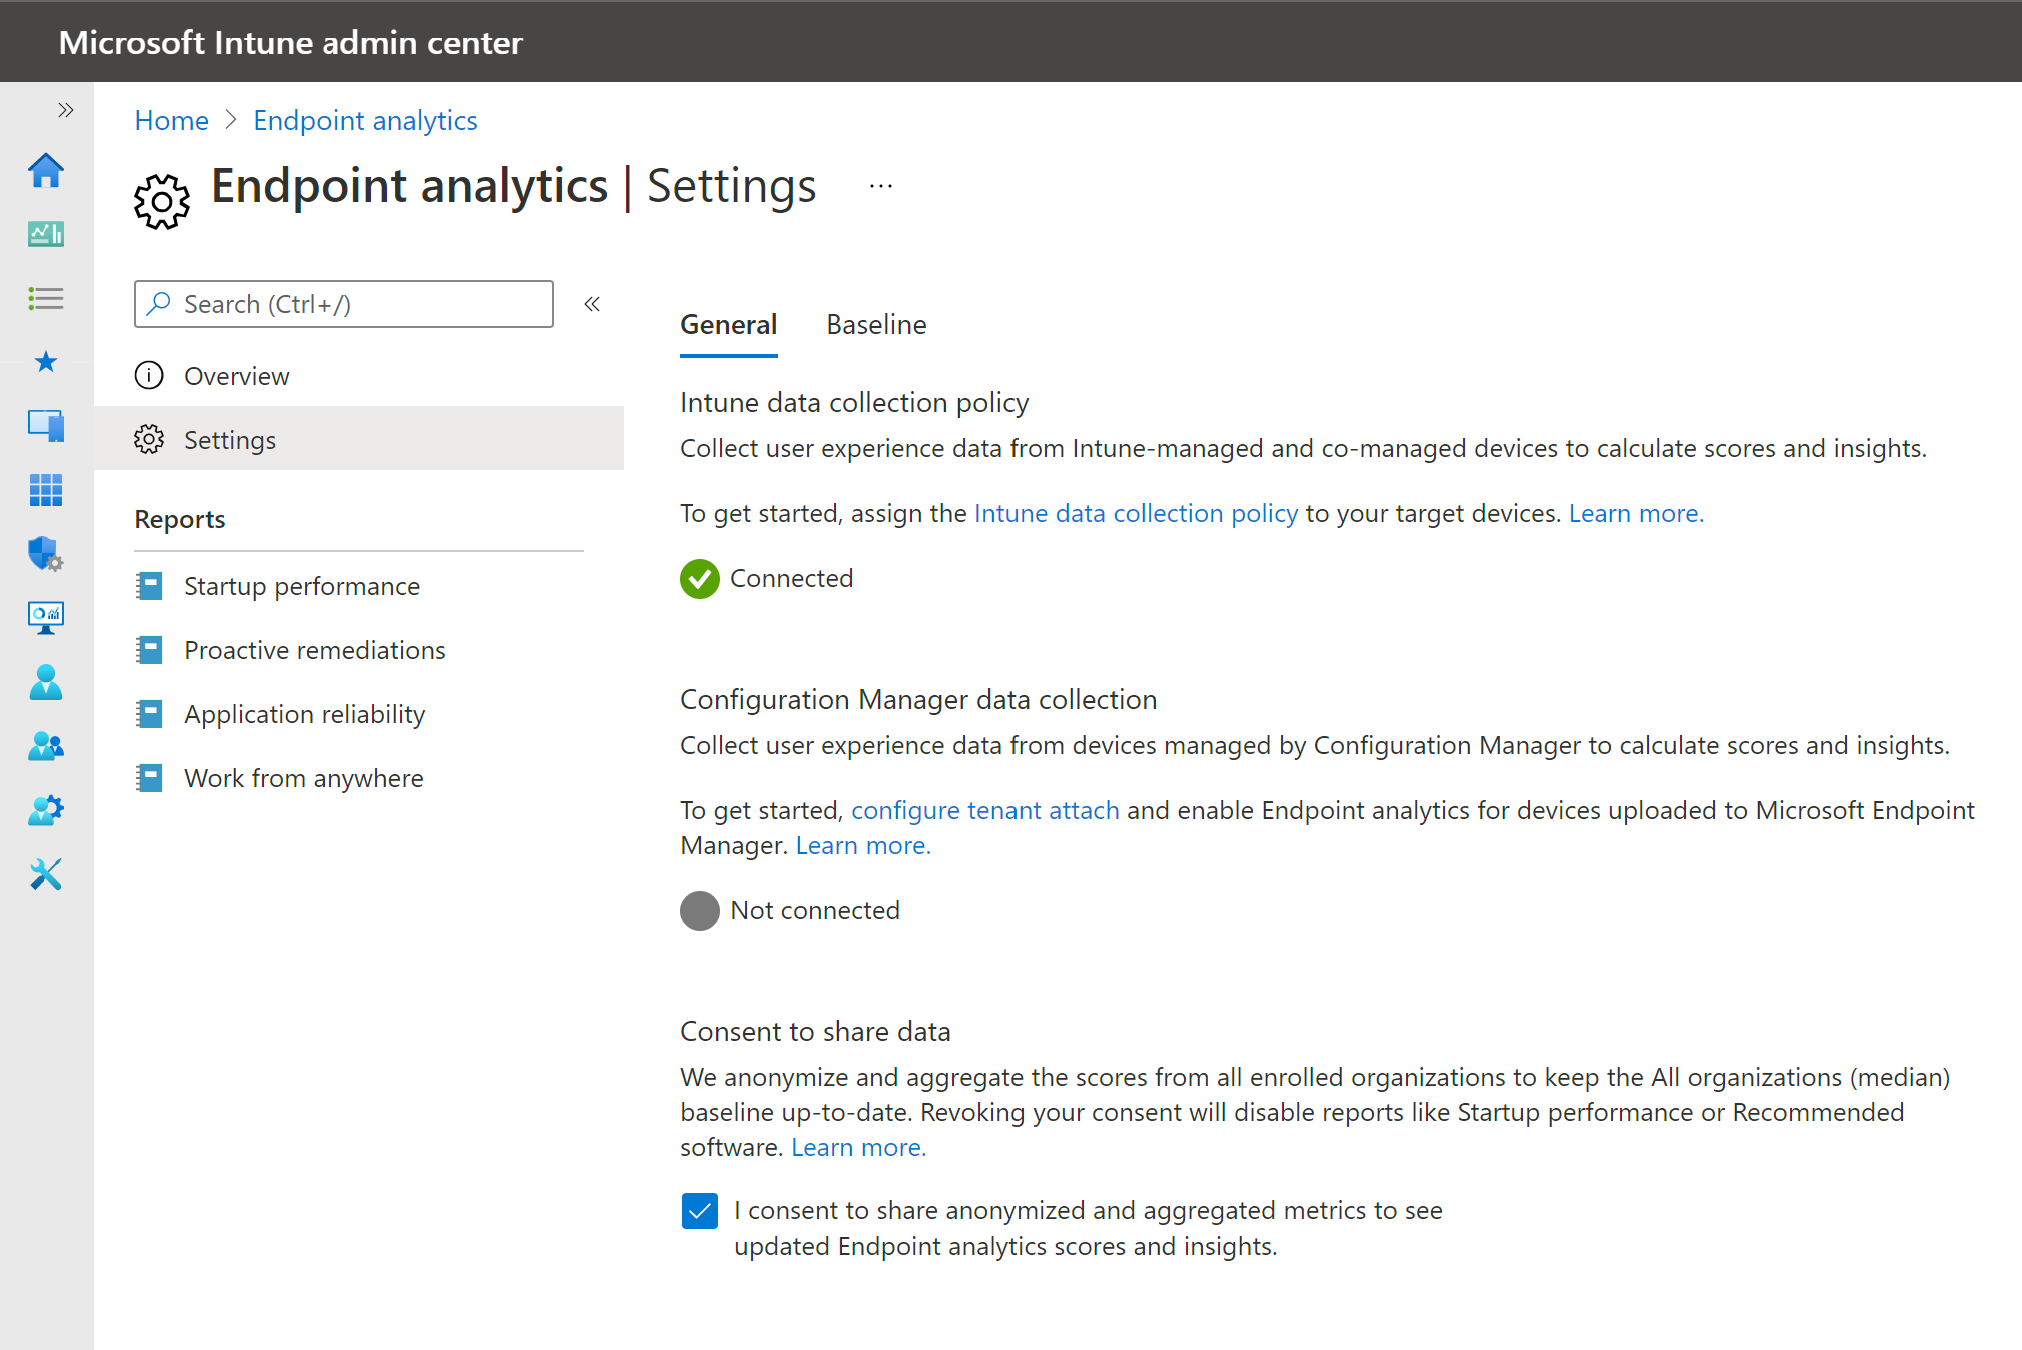 Endpoint analytics general settings page